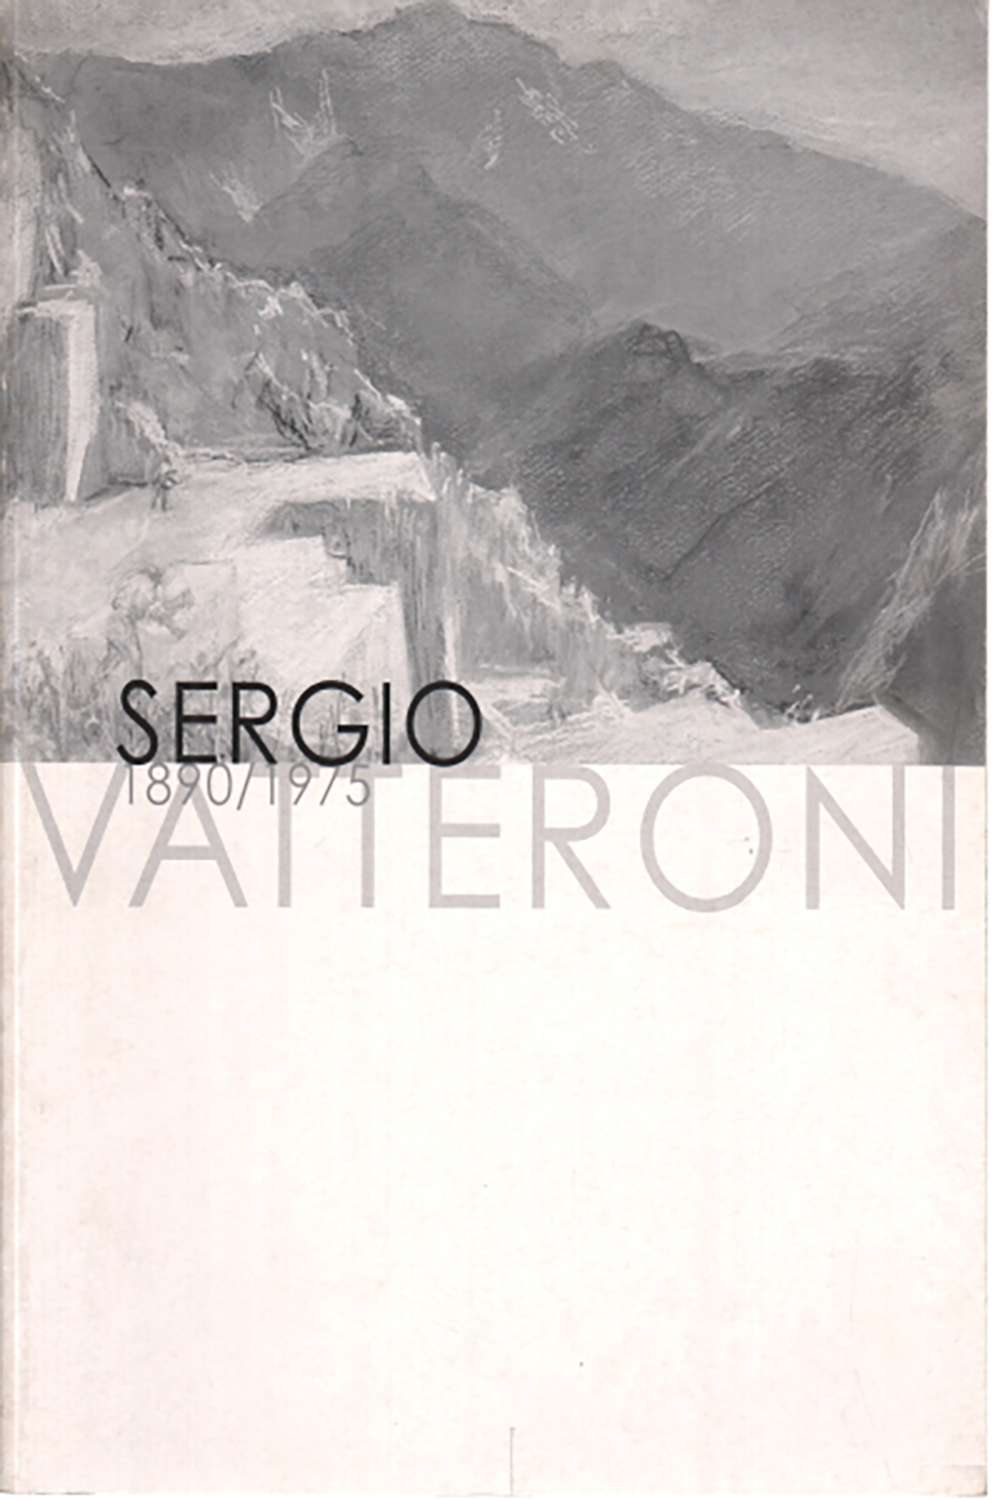 The cover of a book on the art of Sergio Vatteroni